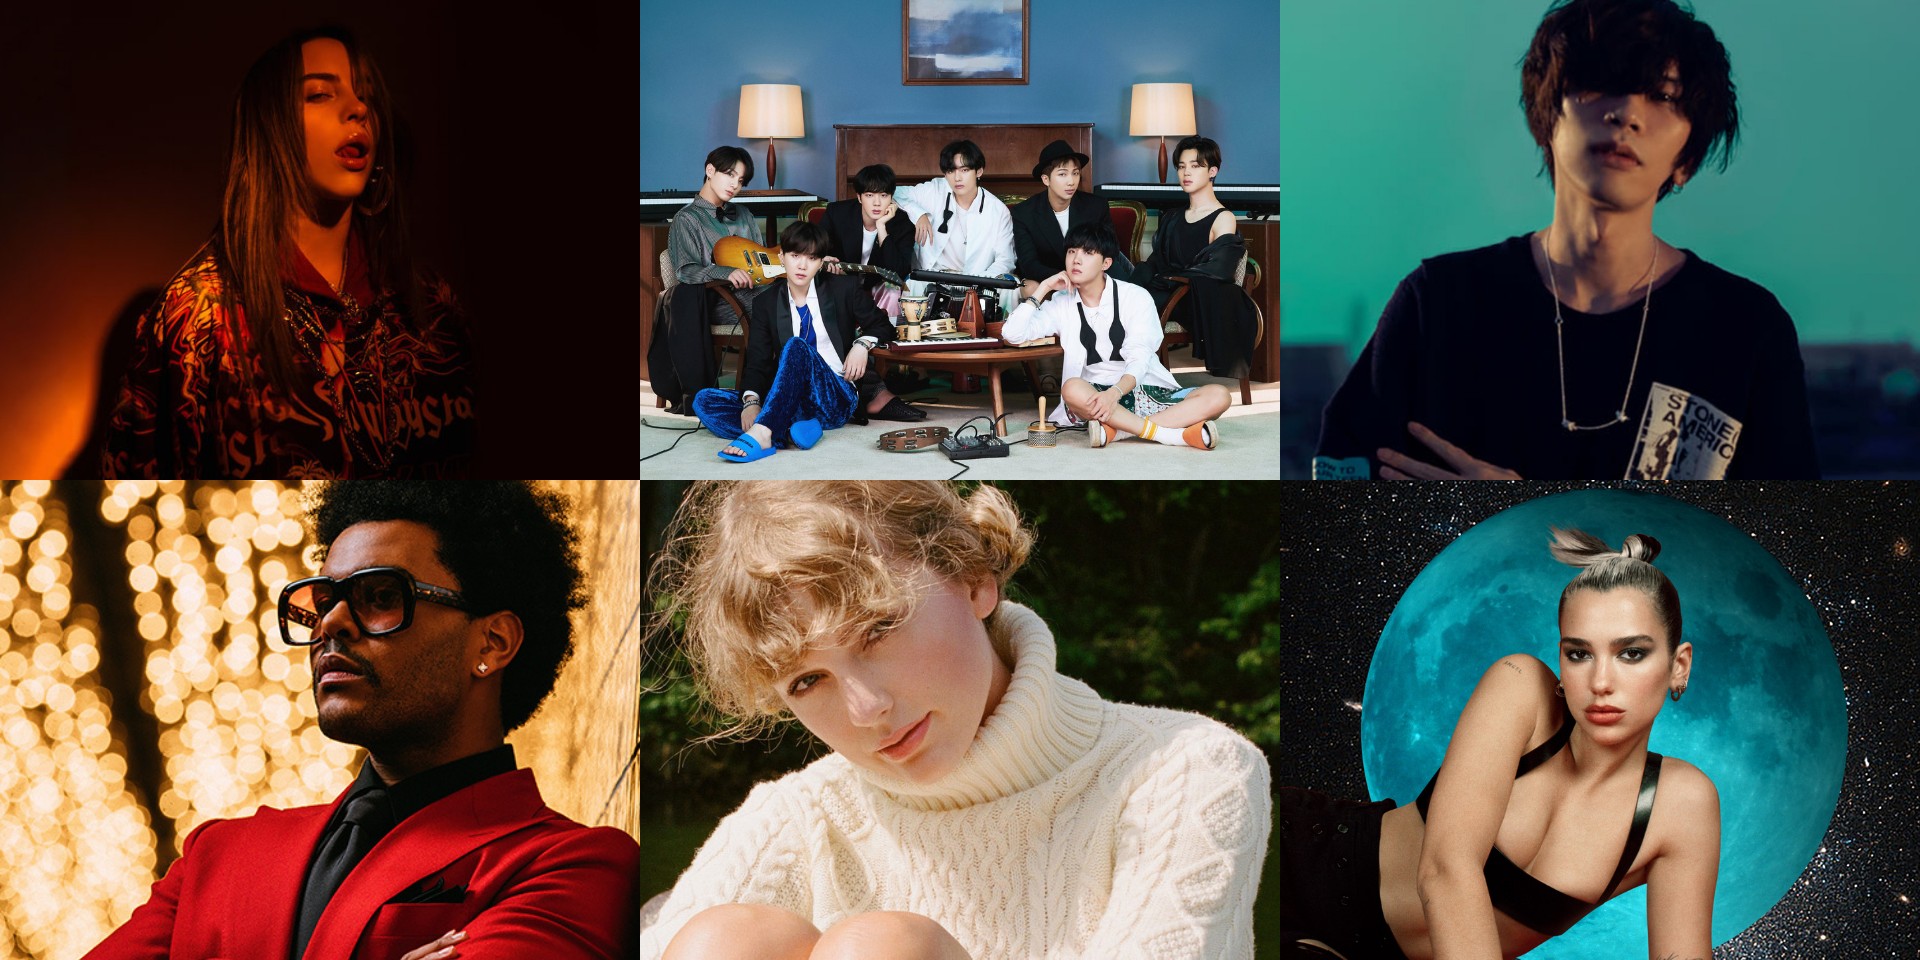 BTS, The Weeknd, Billie Eilish, Kenshi Yonezu, and more have the best-selling albums in the world in 2020